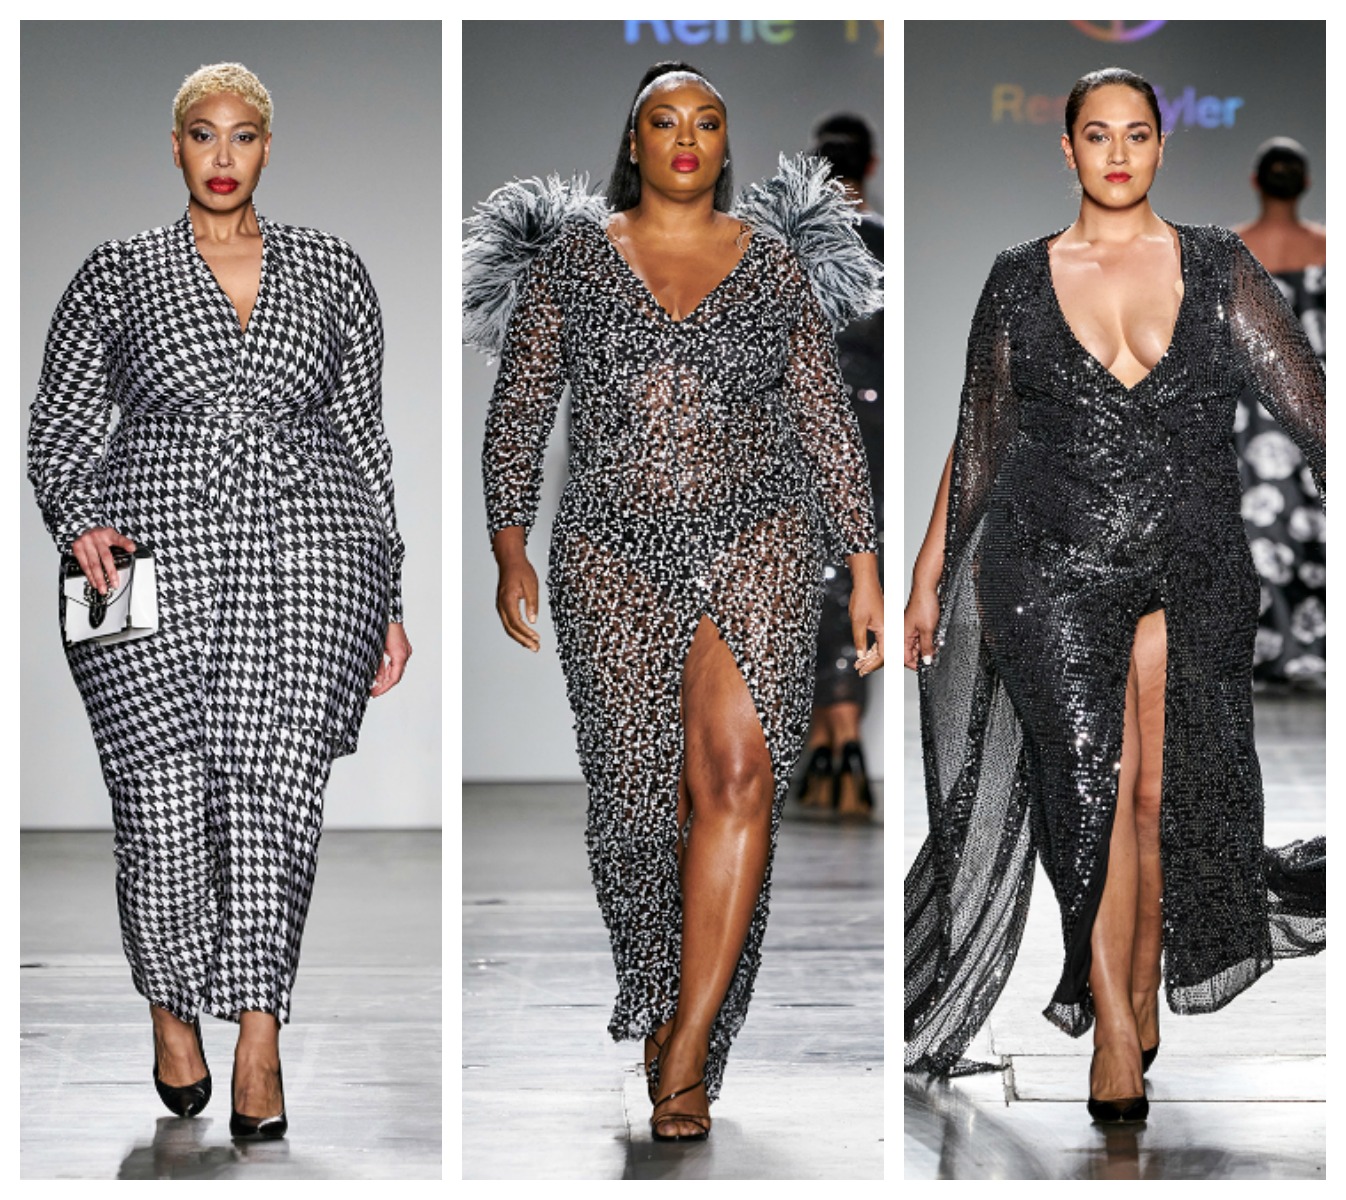 New York Fashion Week Had the Most Plus-Size Models Ever—See All